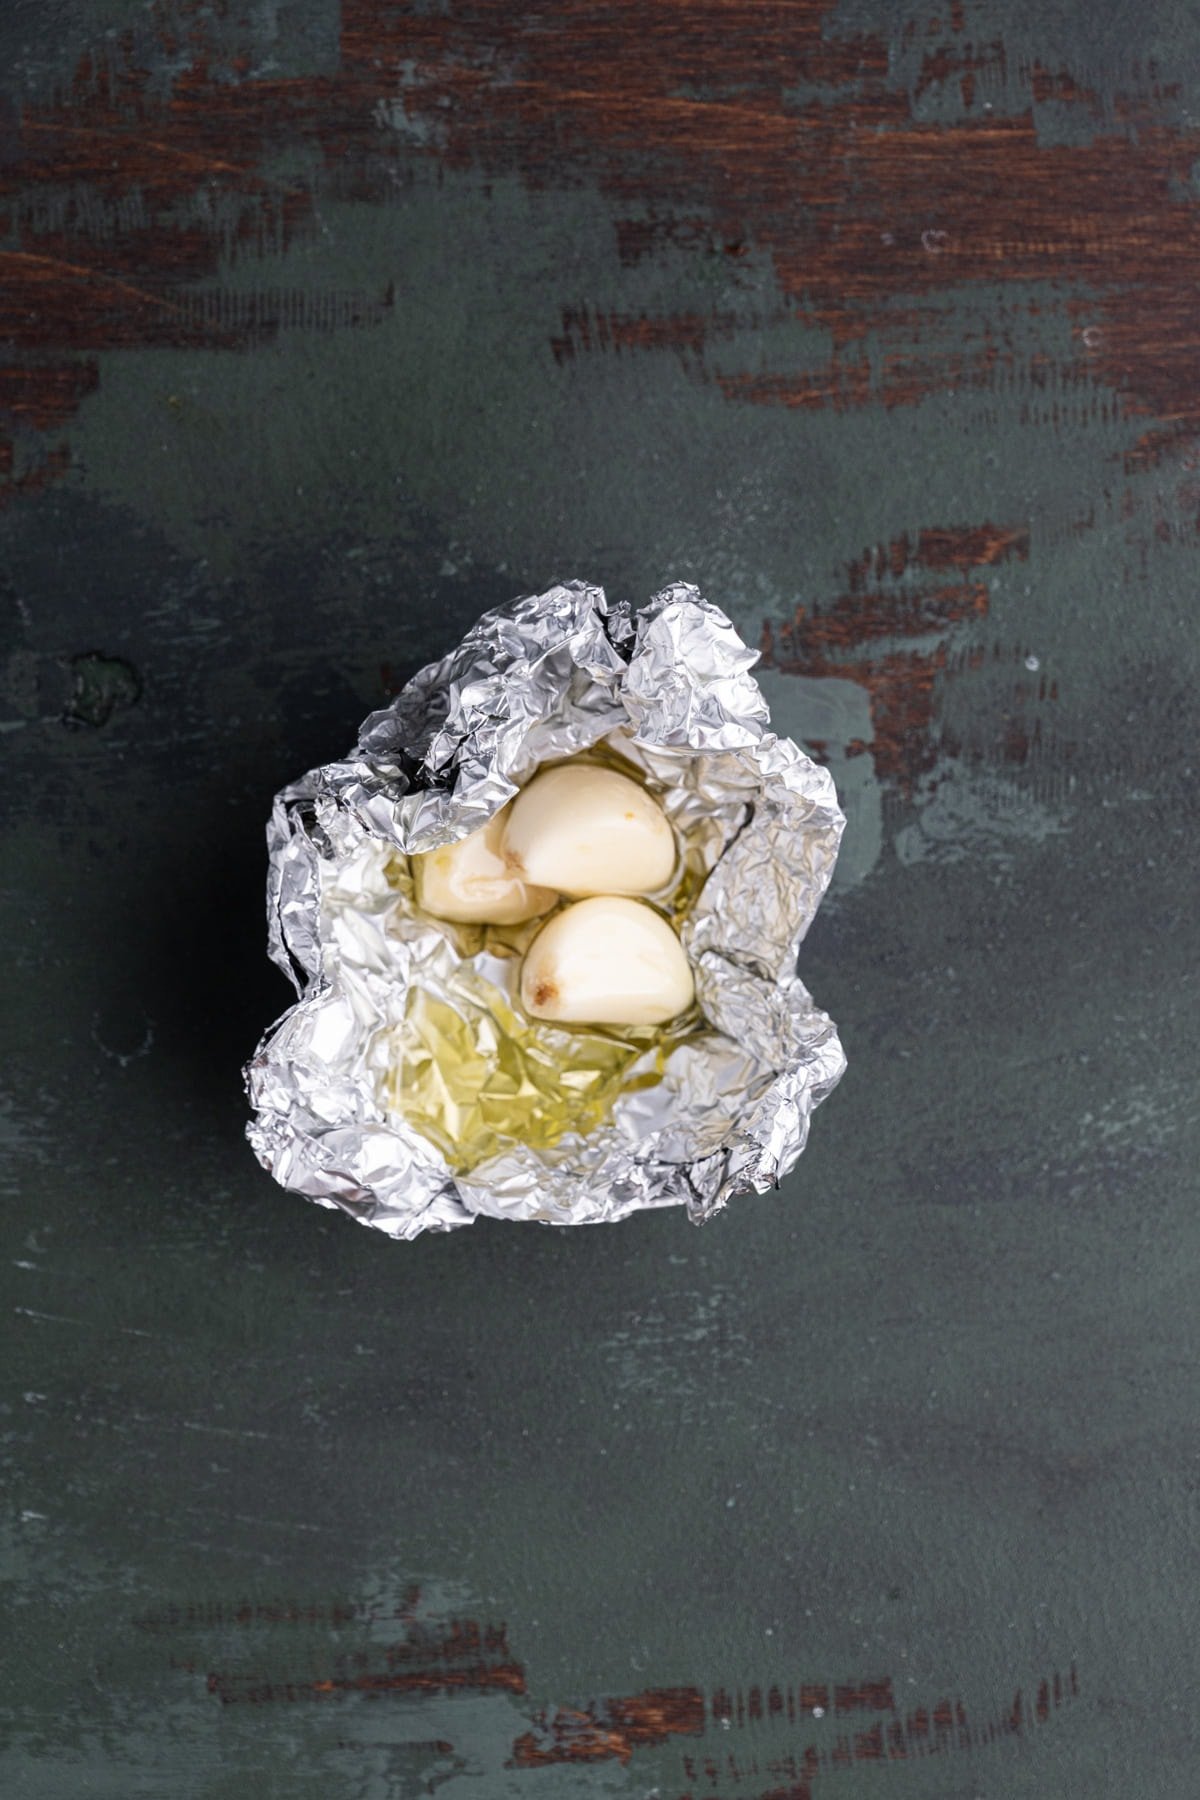 3 cloves of peeled garlic in aluminum foil covered with olive oil